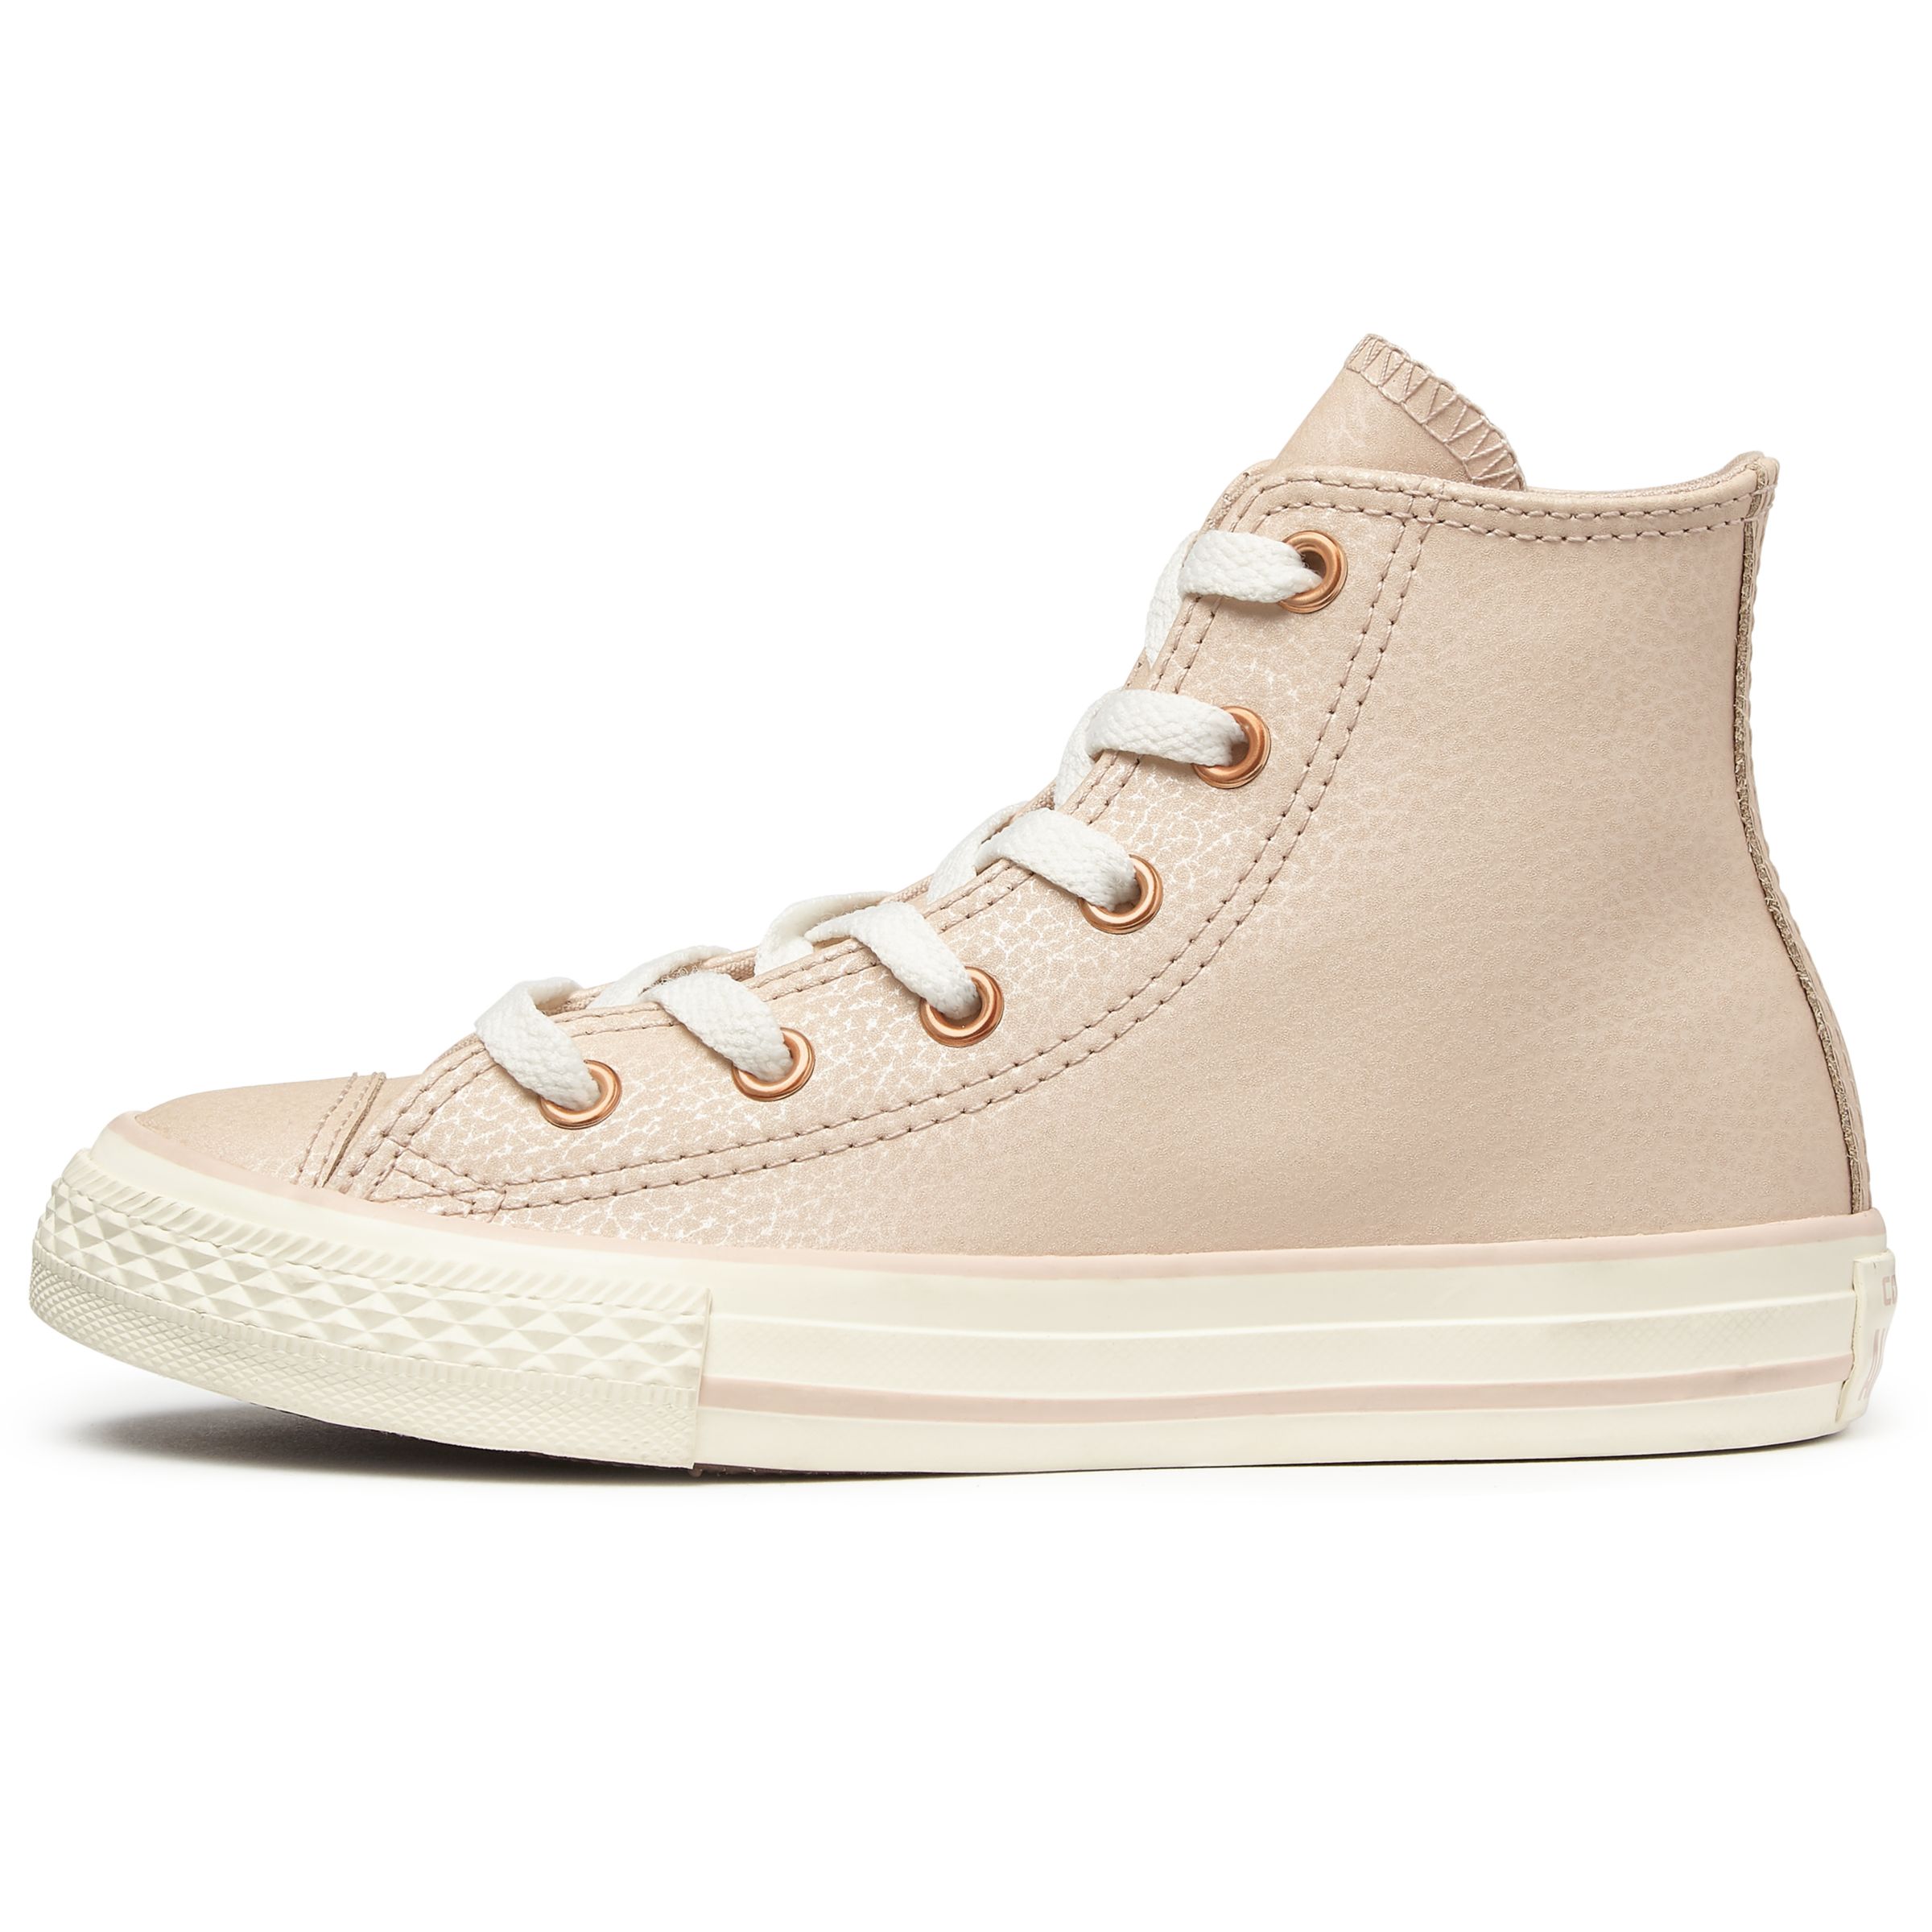 Converse Chuck Taylor All Star Hi-Top Trainers, Pink